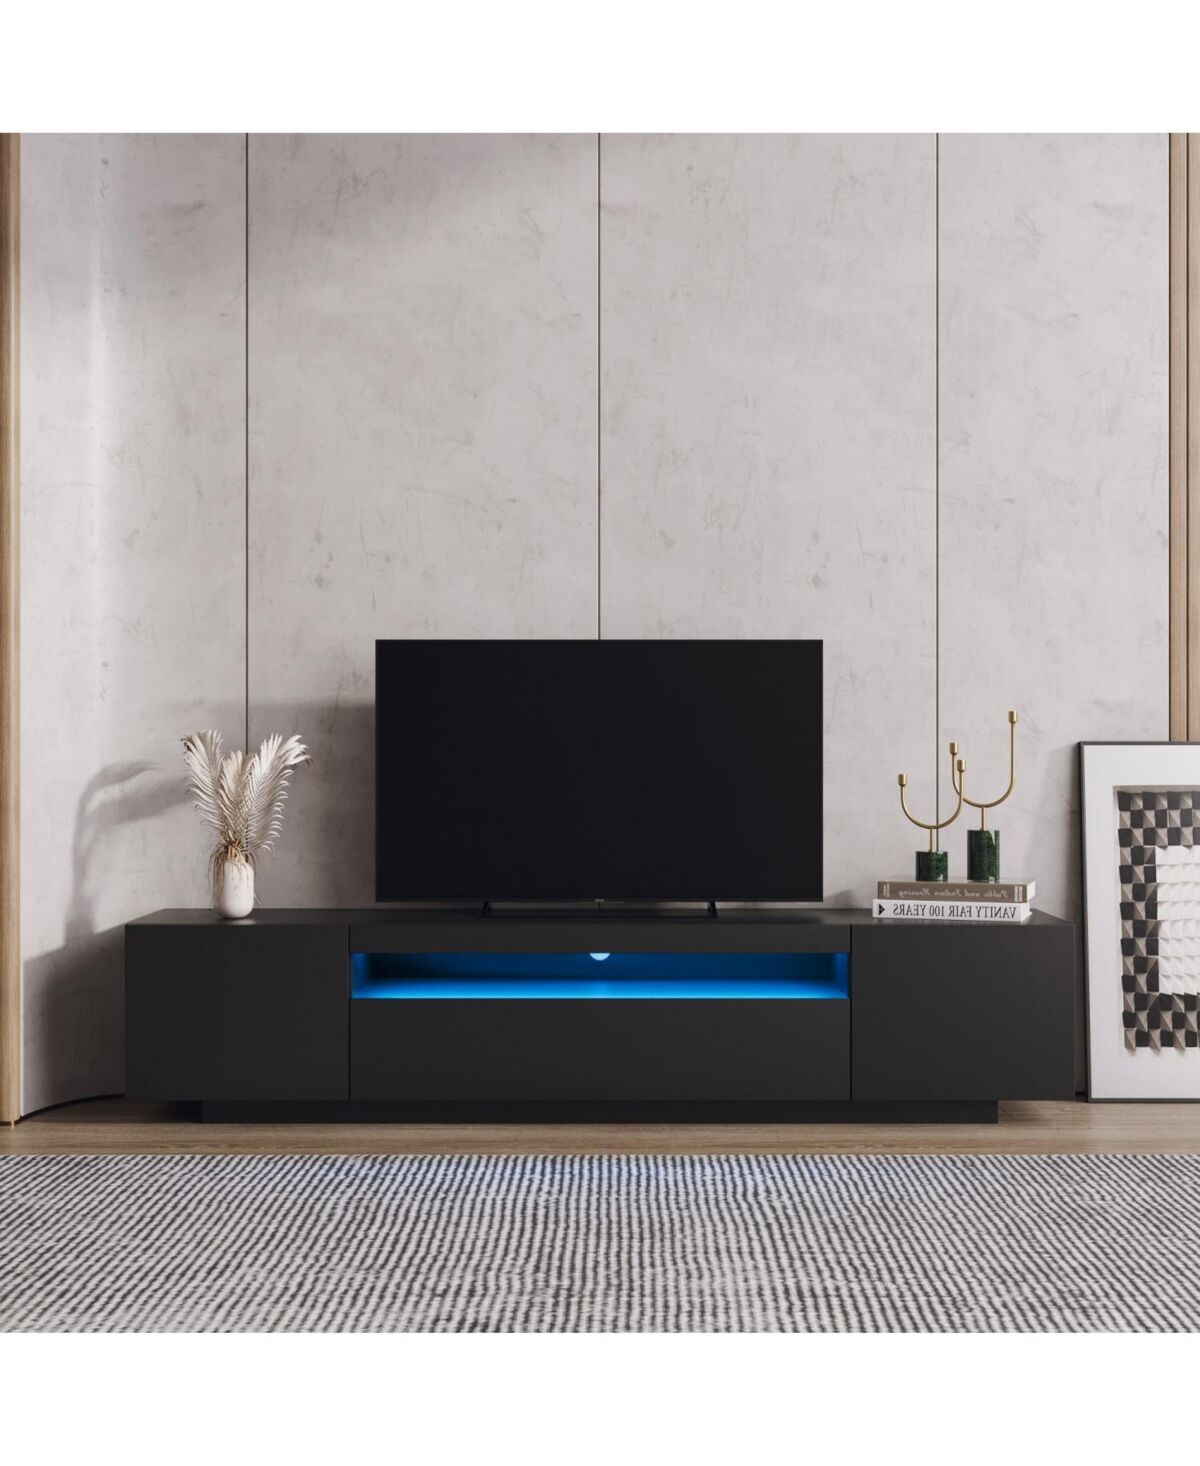 Simplie Fun Tv Cabinet Wholesale, Black Tv Stand with Lights, Modern Led Tv Cabinet with Storage Drawers, Living Room Entertainment Center Media - Bla